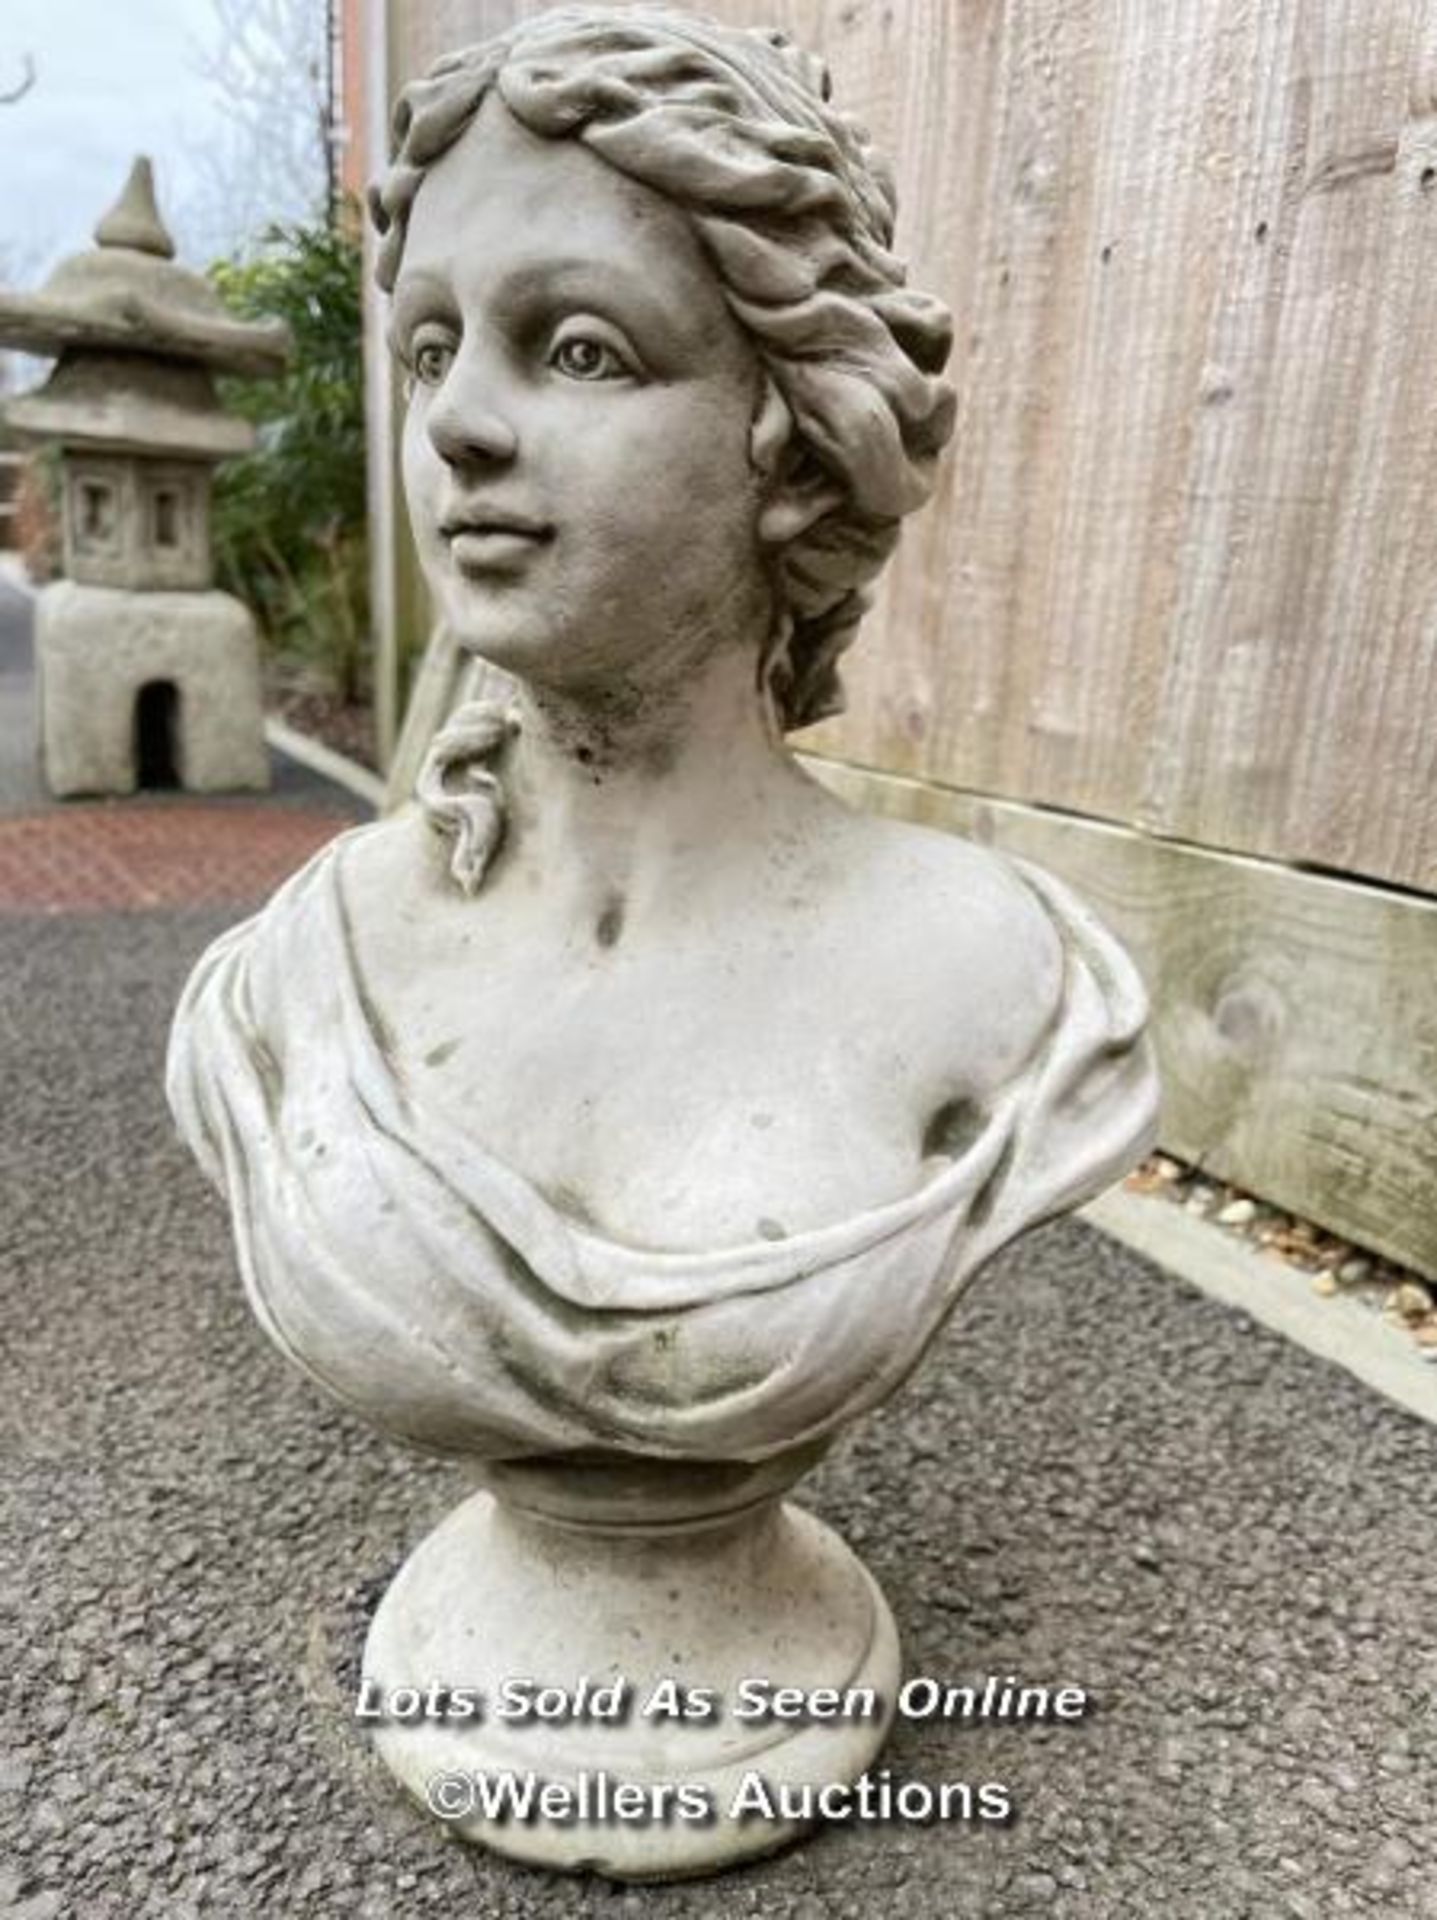 STONE FRENCH MAID BUST, 42CM (H) / ITEM LOCATION: GUILDFORD, GU14SJ (WELLERS AUCTIONS)